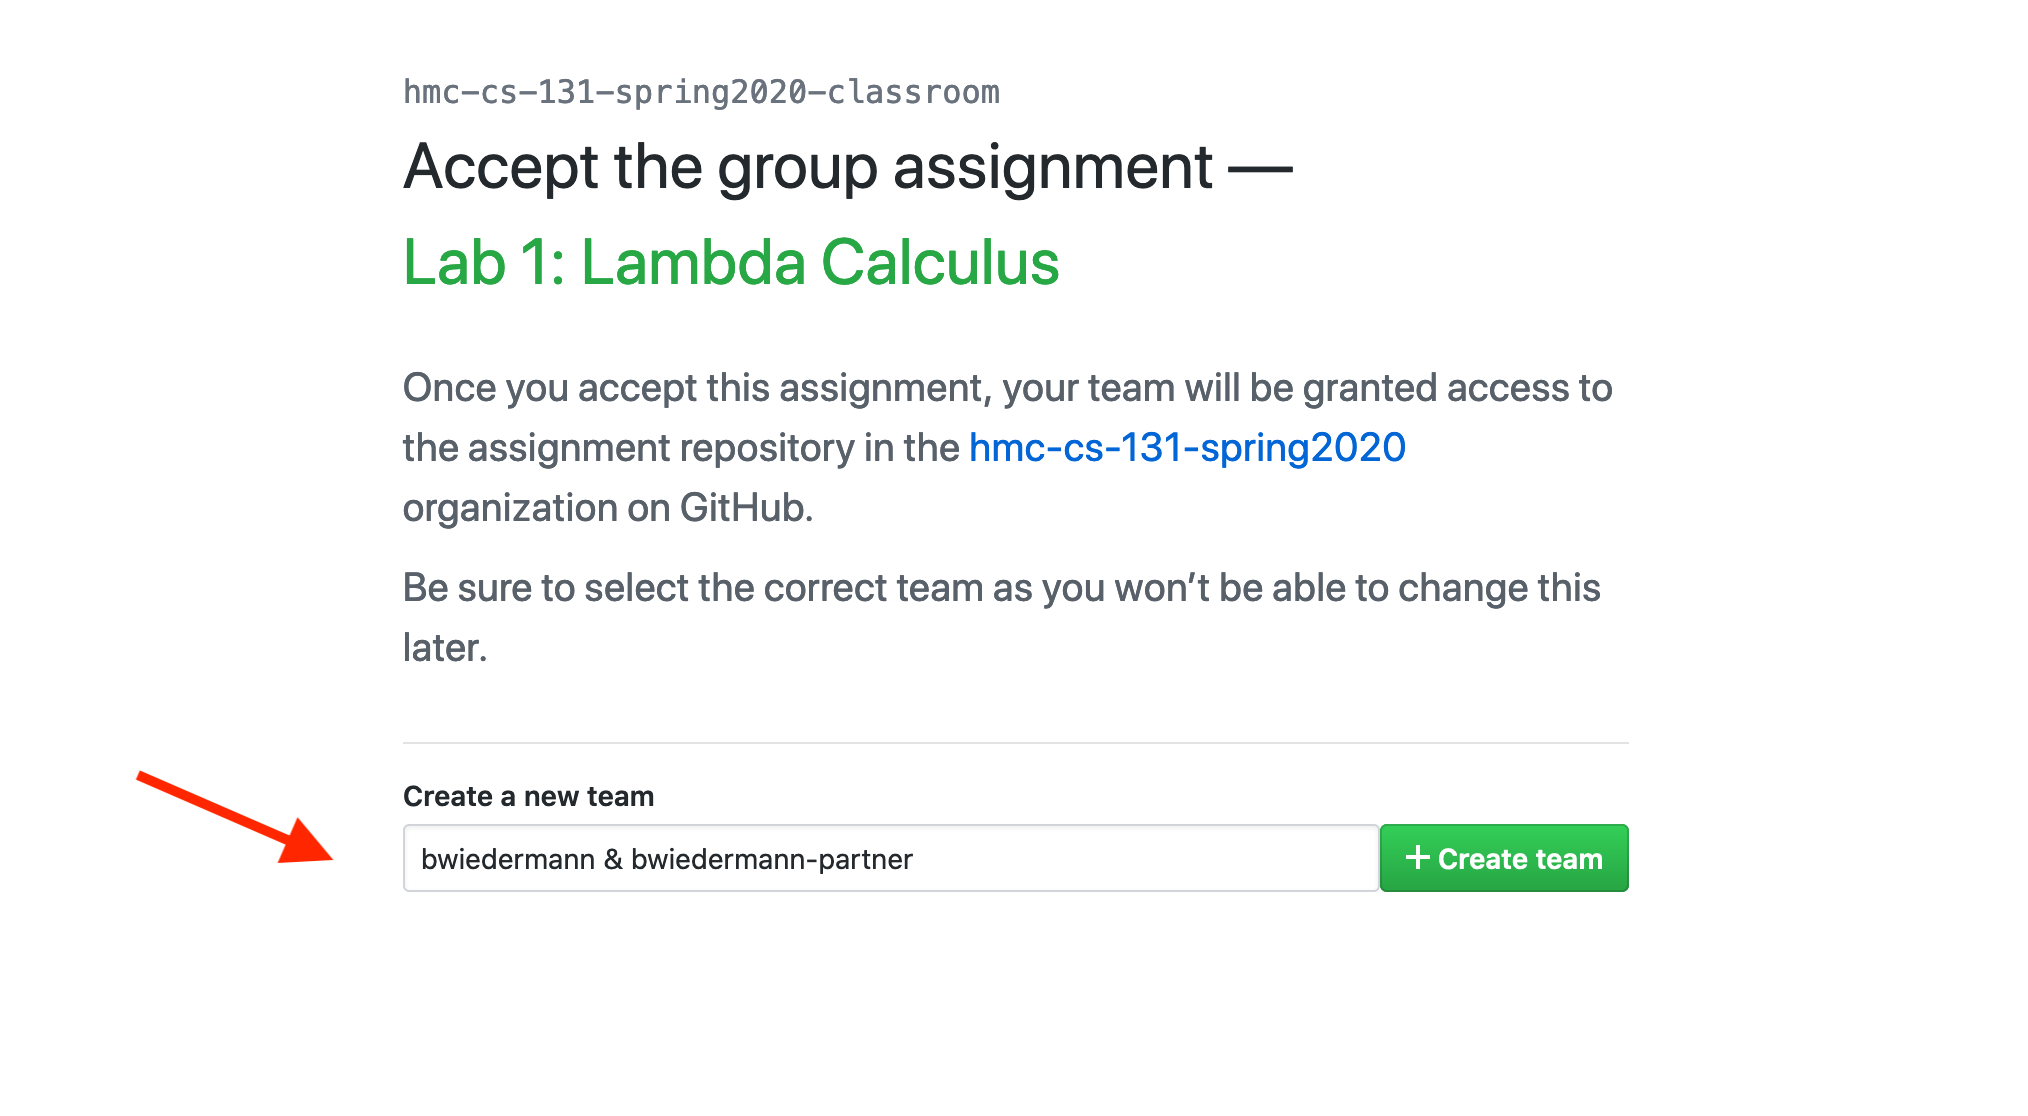 Create a team based on your GitHub ids